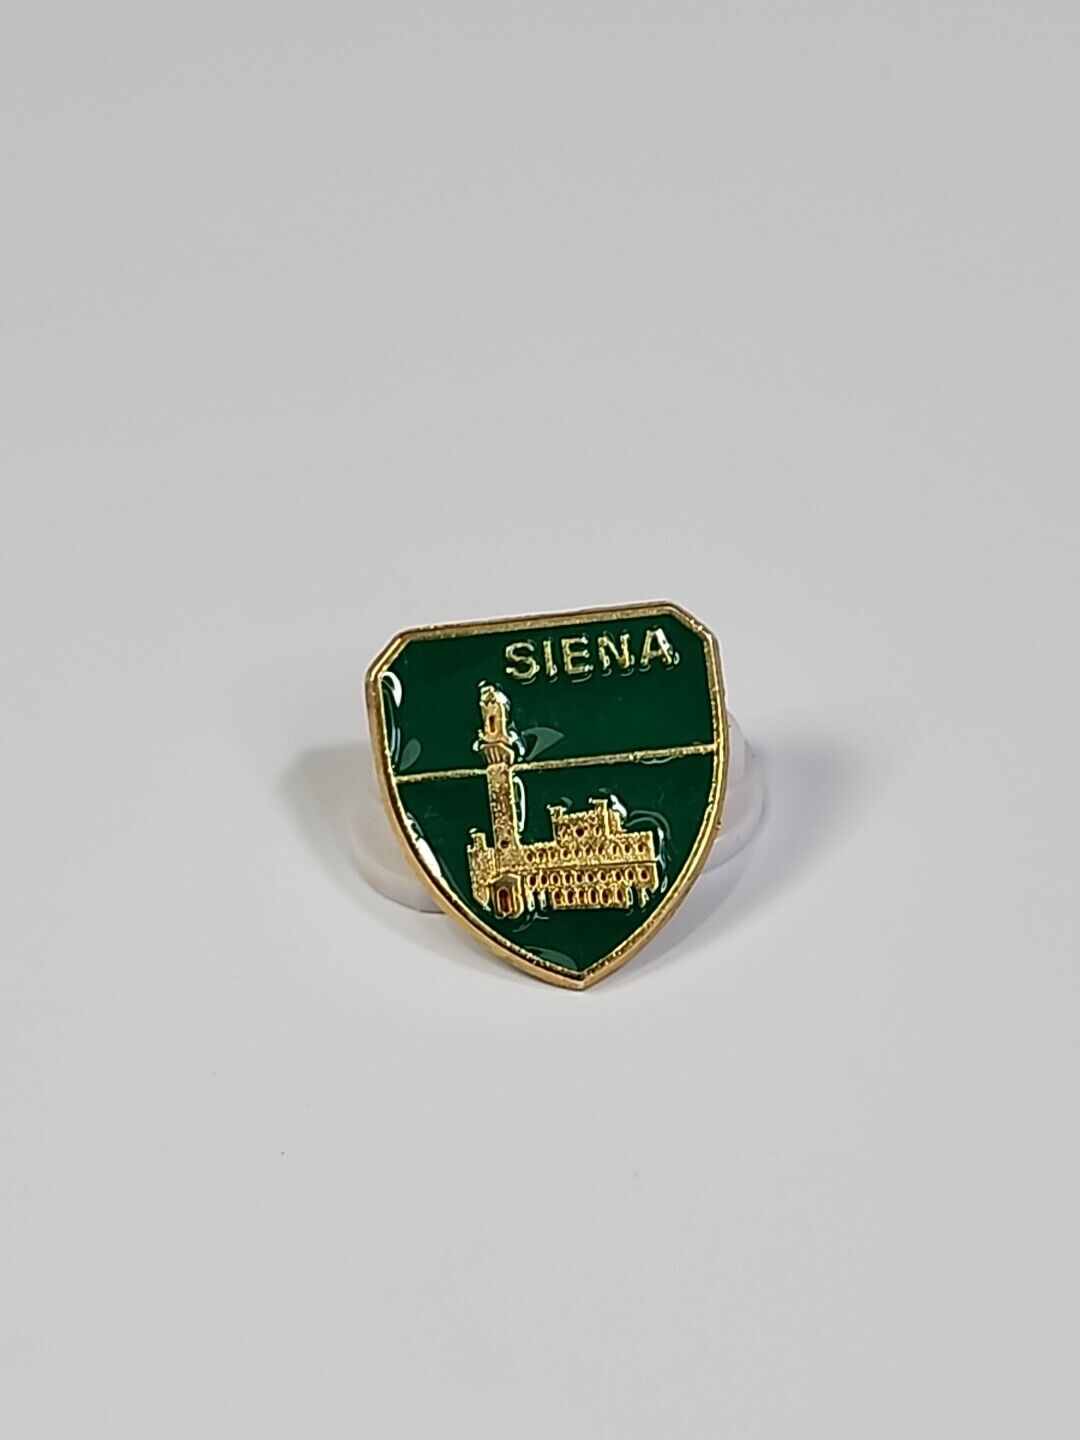 Siena Travel Souvenir Pin Town in Italy Green & Gold Colors